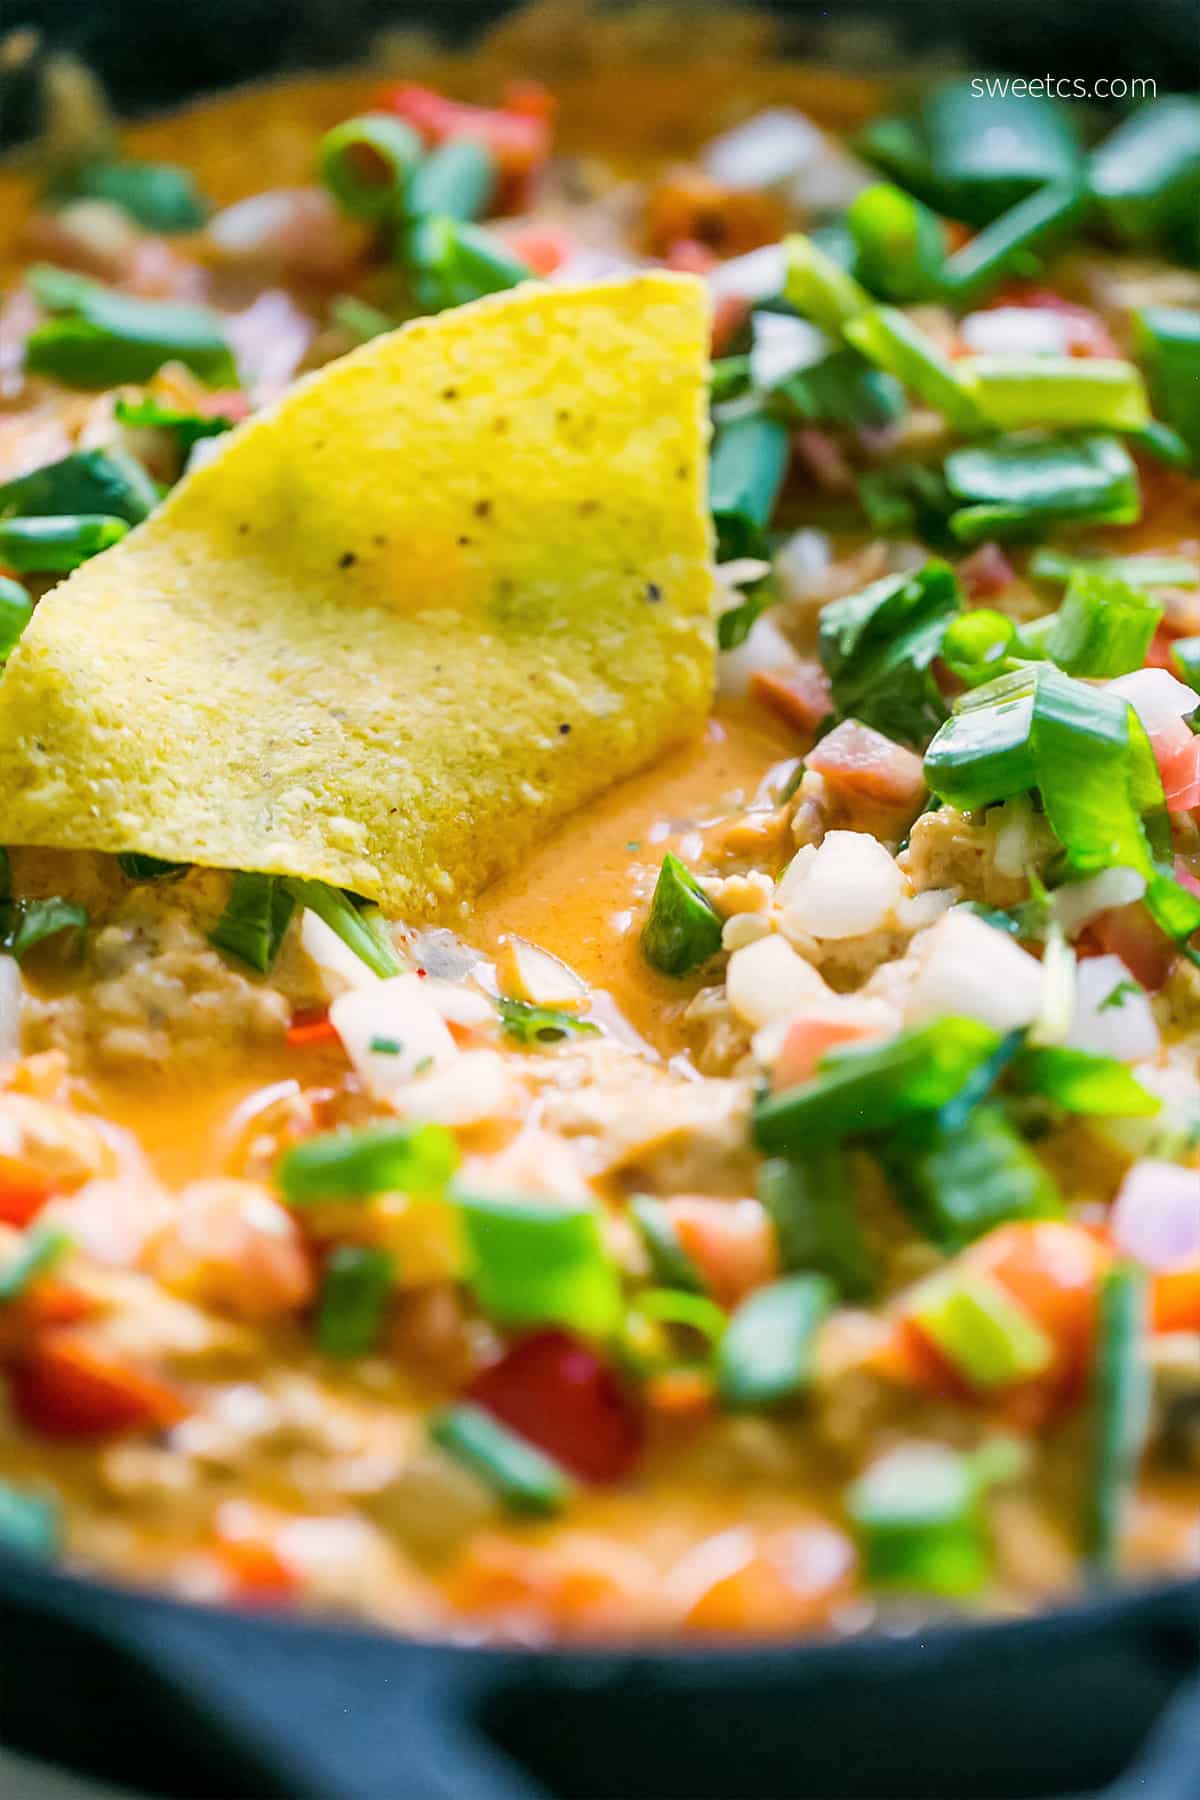 This dip is so delicious- full of cheesy chicken enchilada flavors!